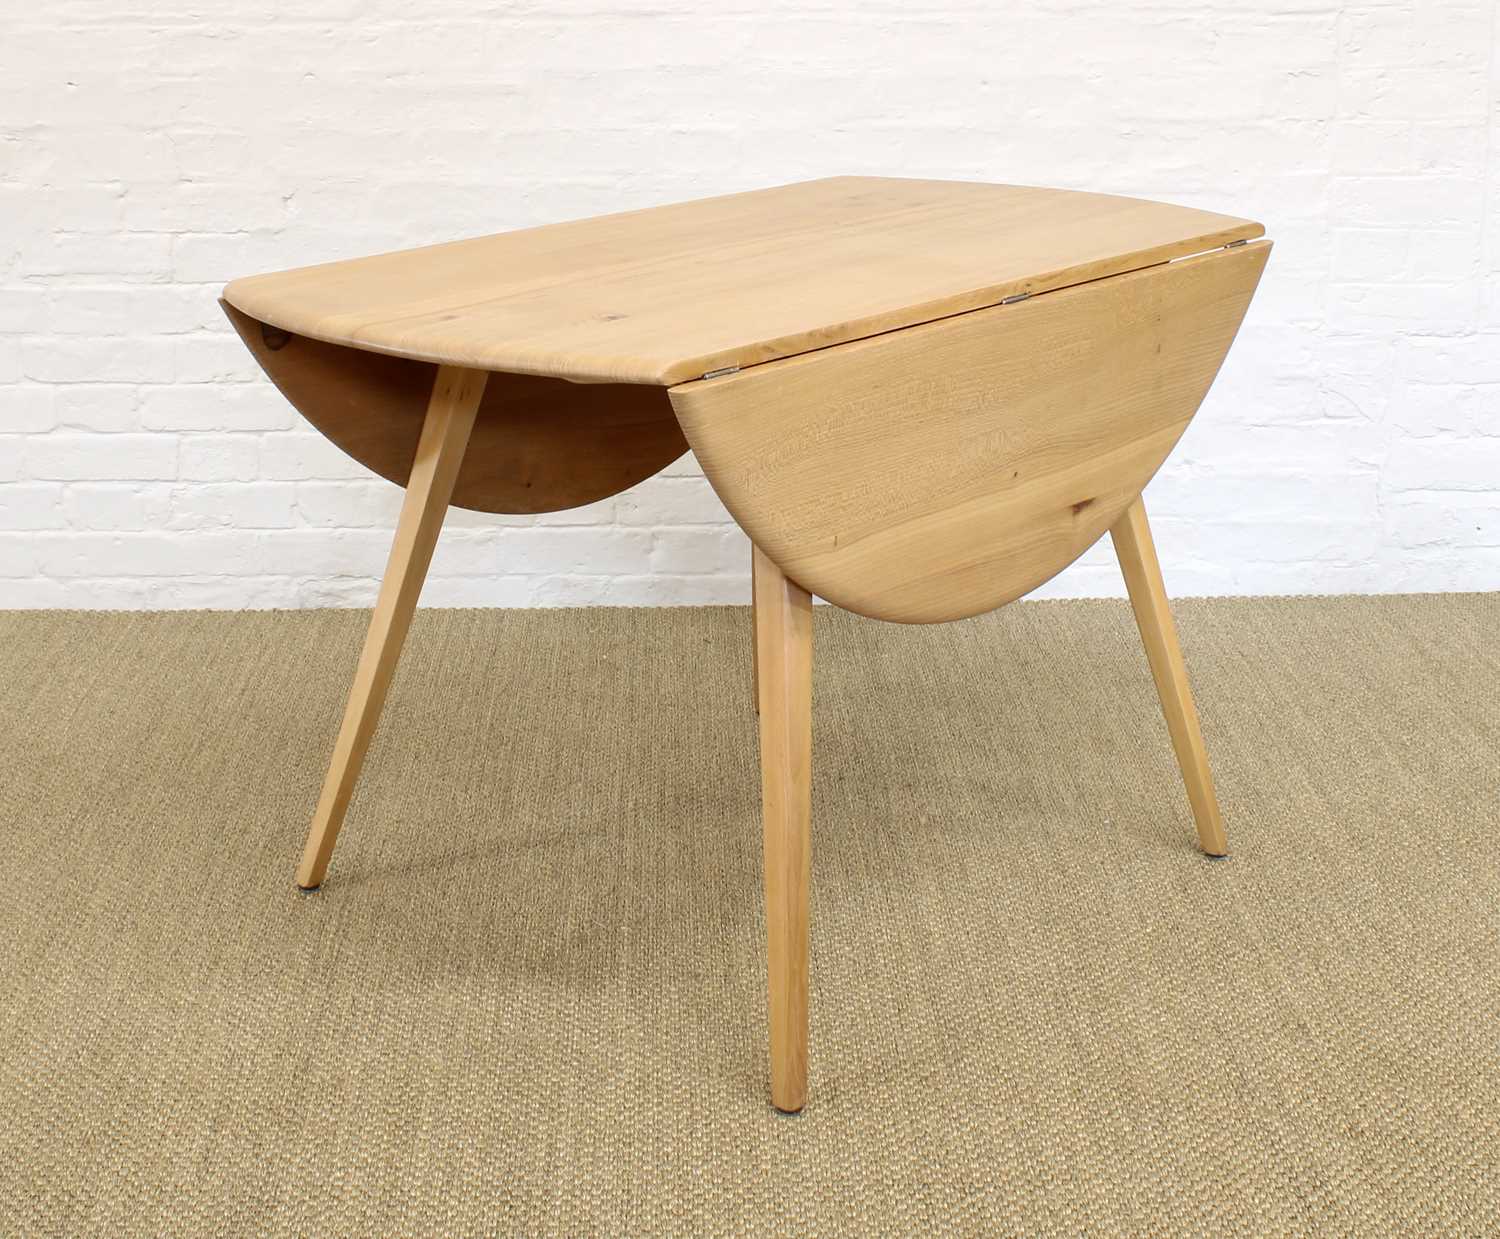 Lucian Ercolani for Ercol Model 384 "Windsor" Drop-Leaf Dining Table - Image 3 of 12